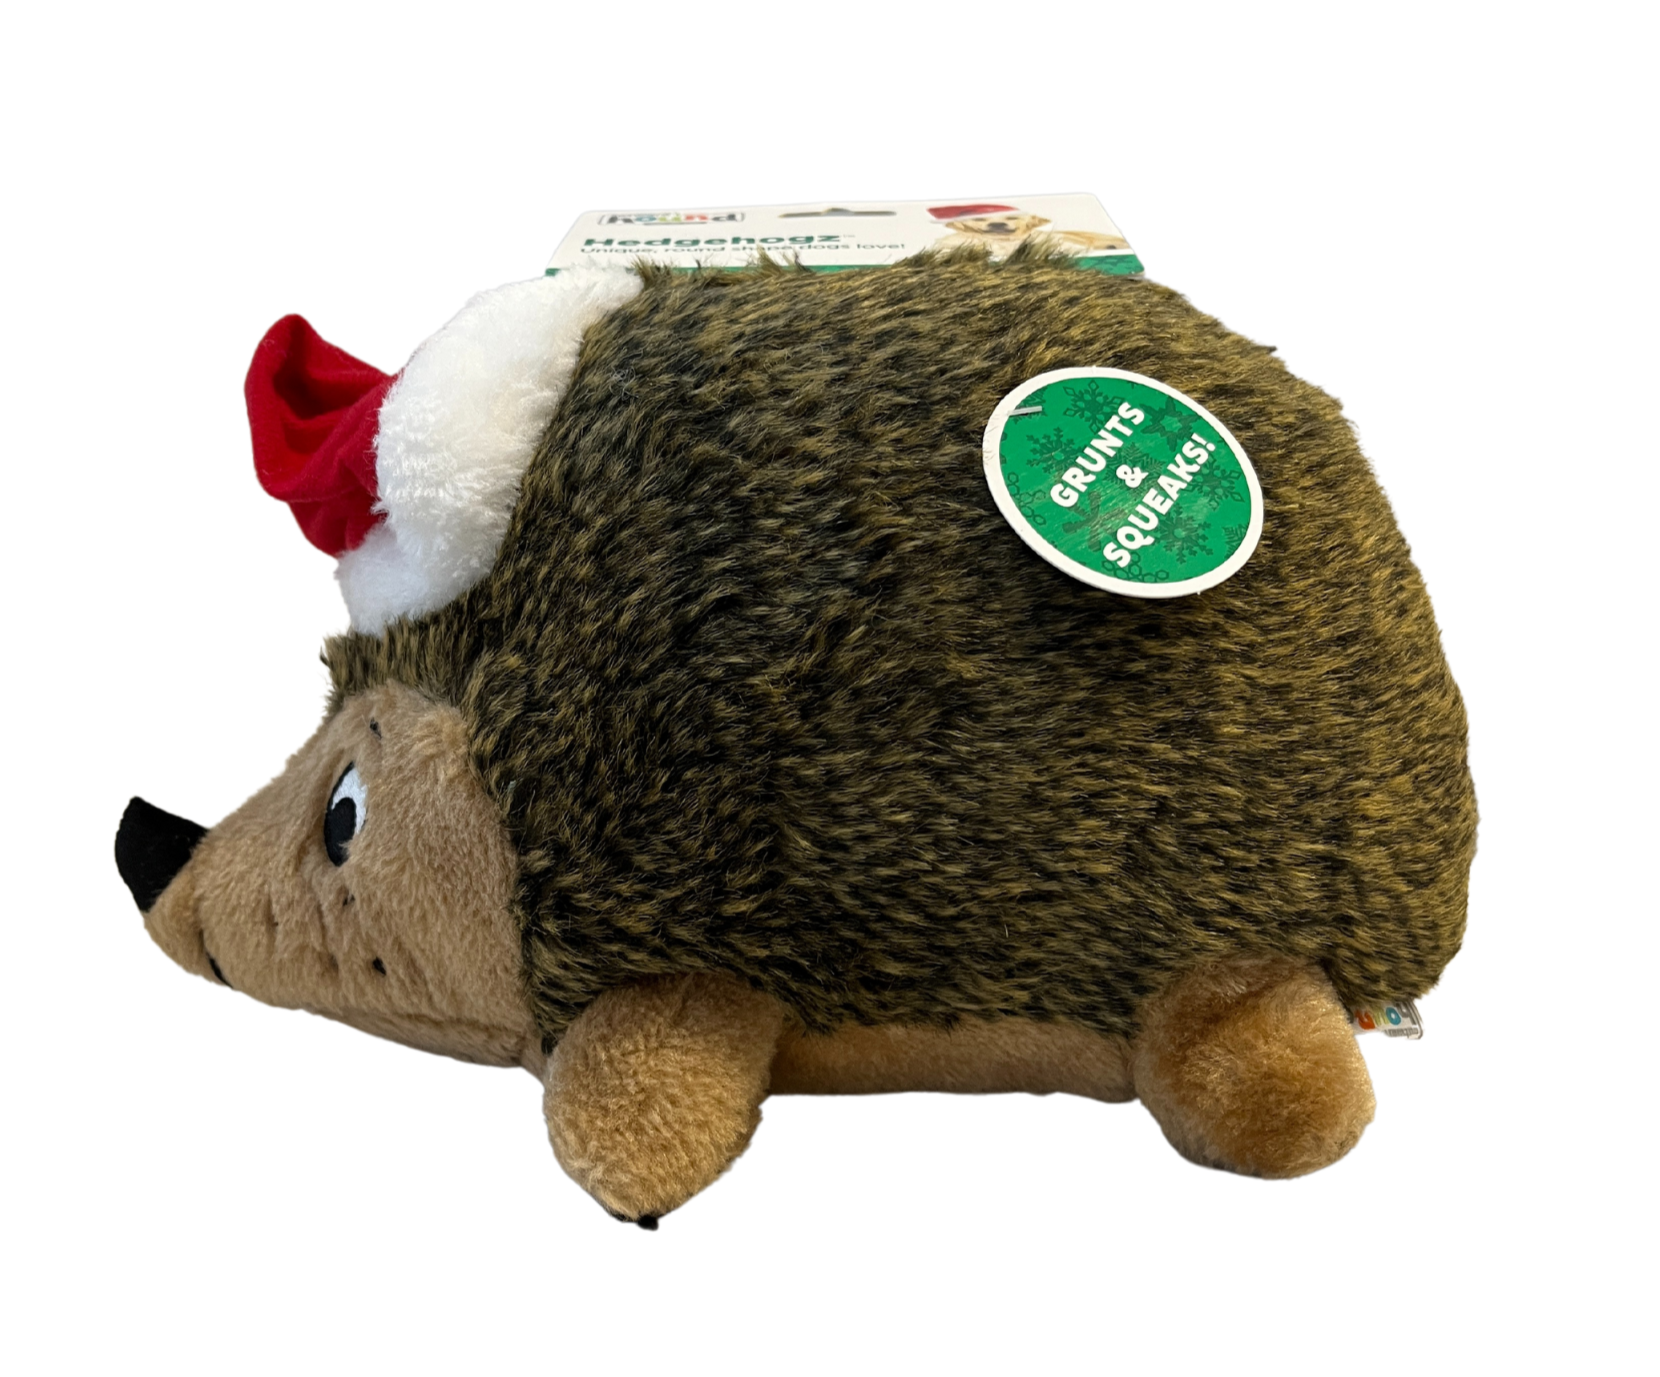 Side view of Outward Hound Holiday Hedgehogz- Large. Tag on toy reads, "Grunts & Squeaks!"